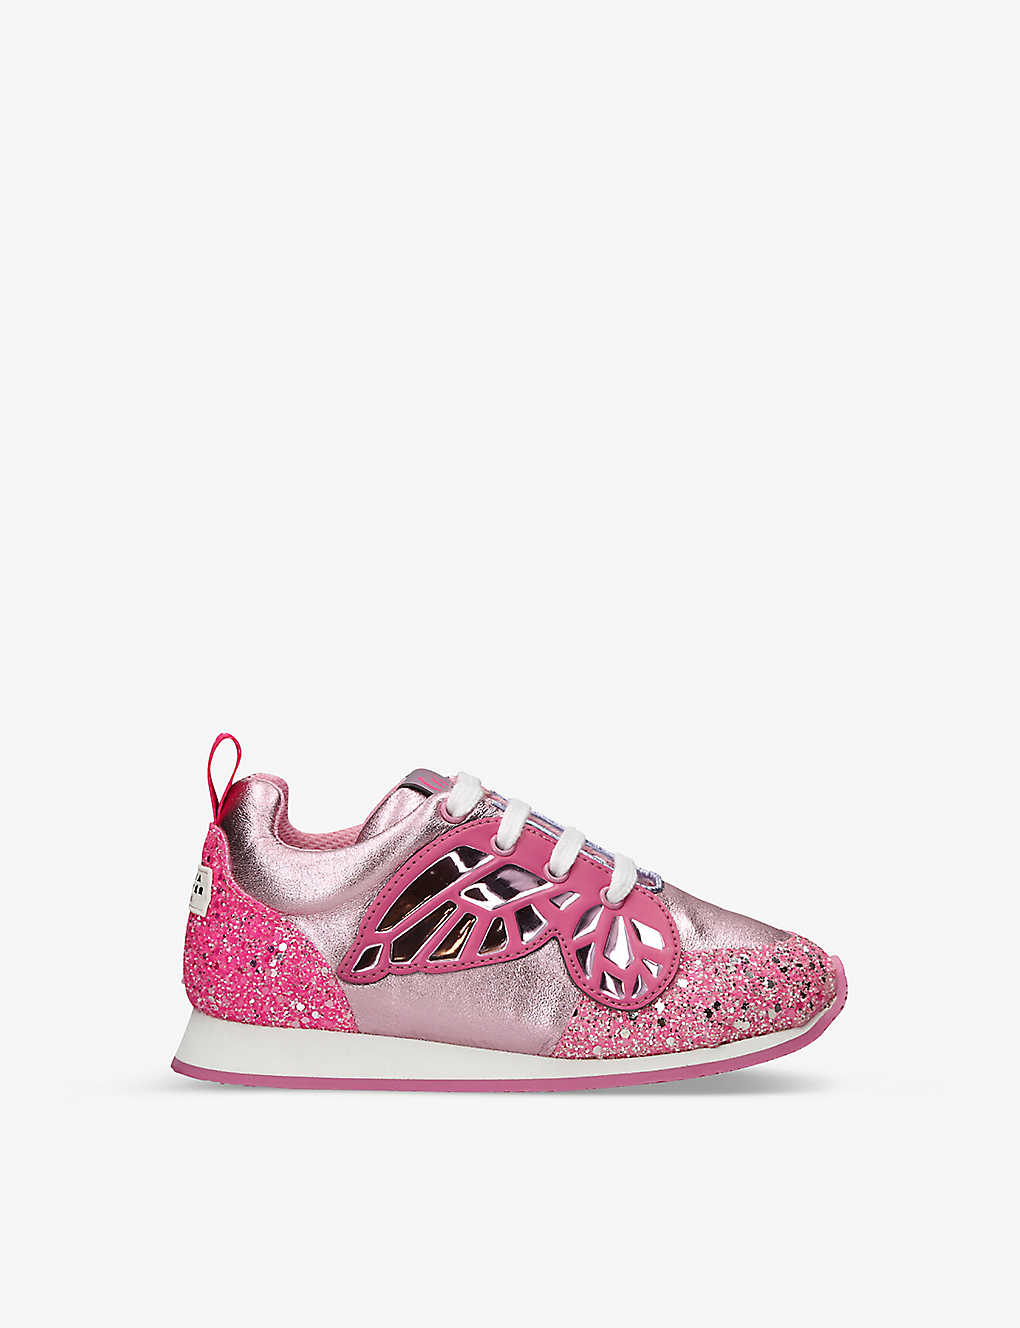 Sophia Webster Girls Pink Kids Chiara Glittered Leather Low-top Trainers 1-8 Years